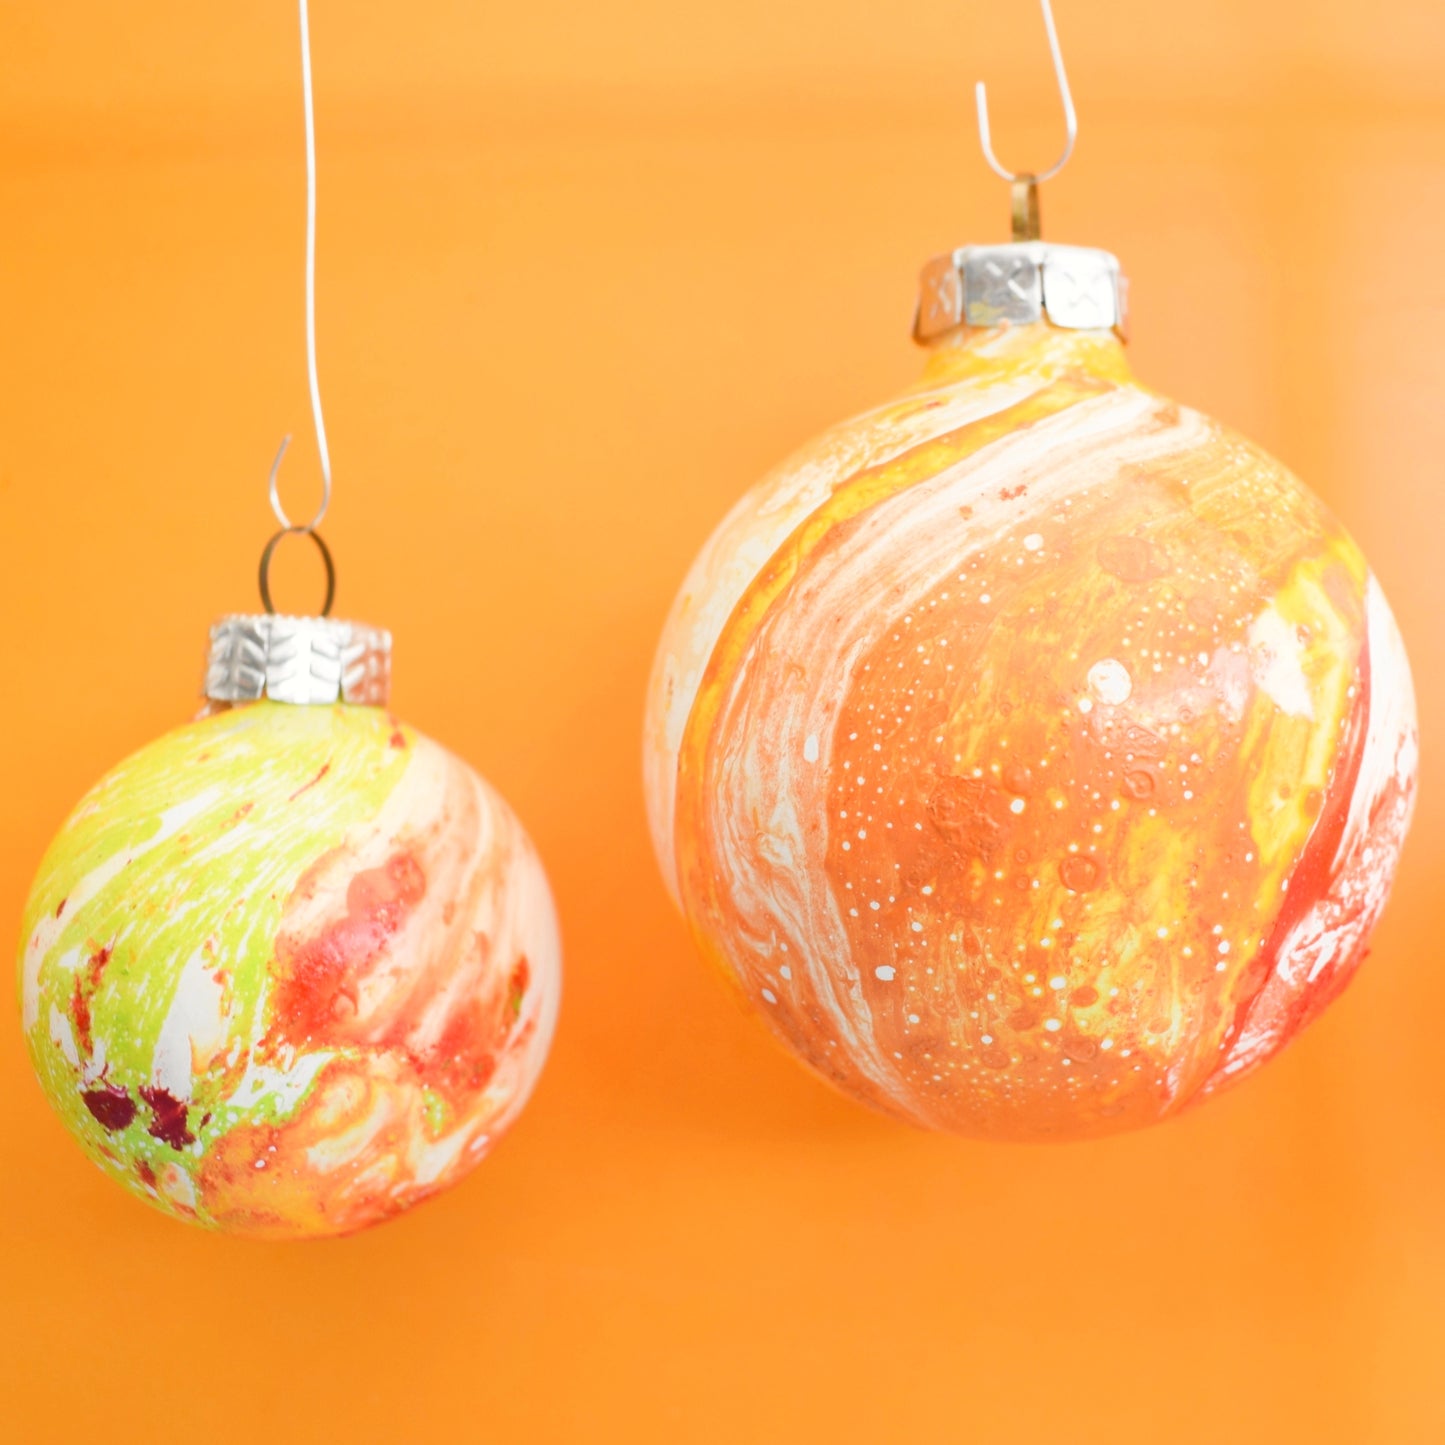 Vintage 1970s Glass Baubles - Hydro Dipped - Orange & Yellow